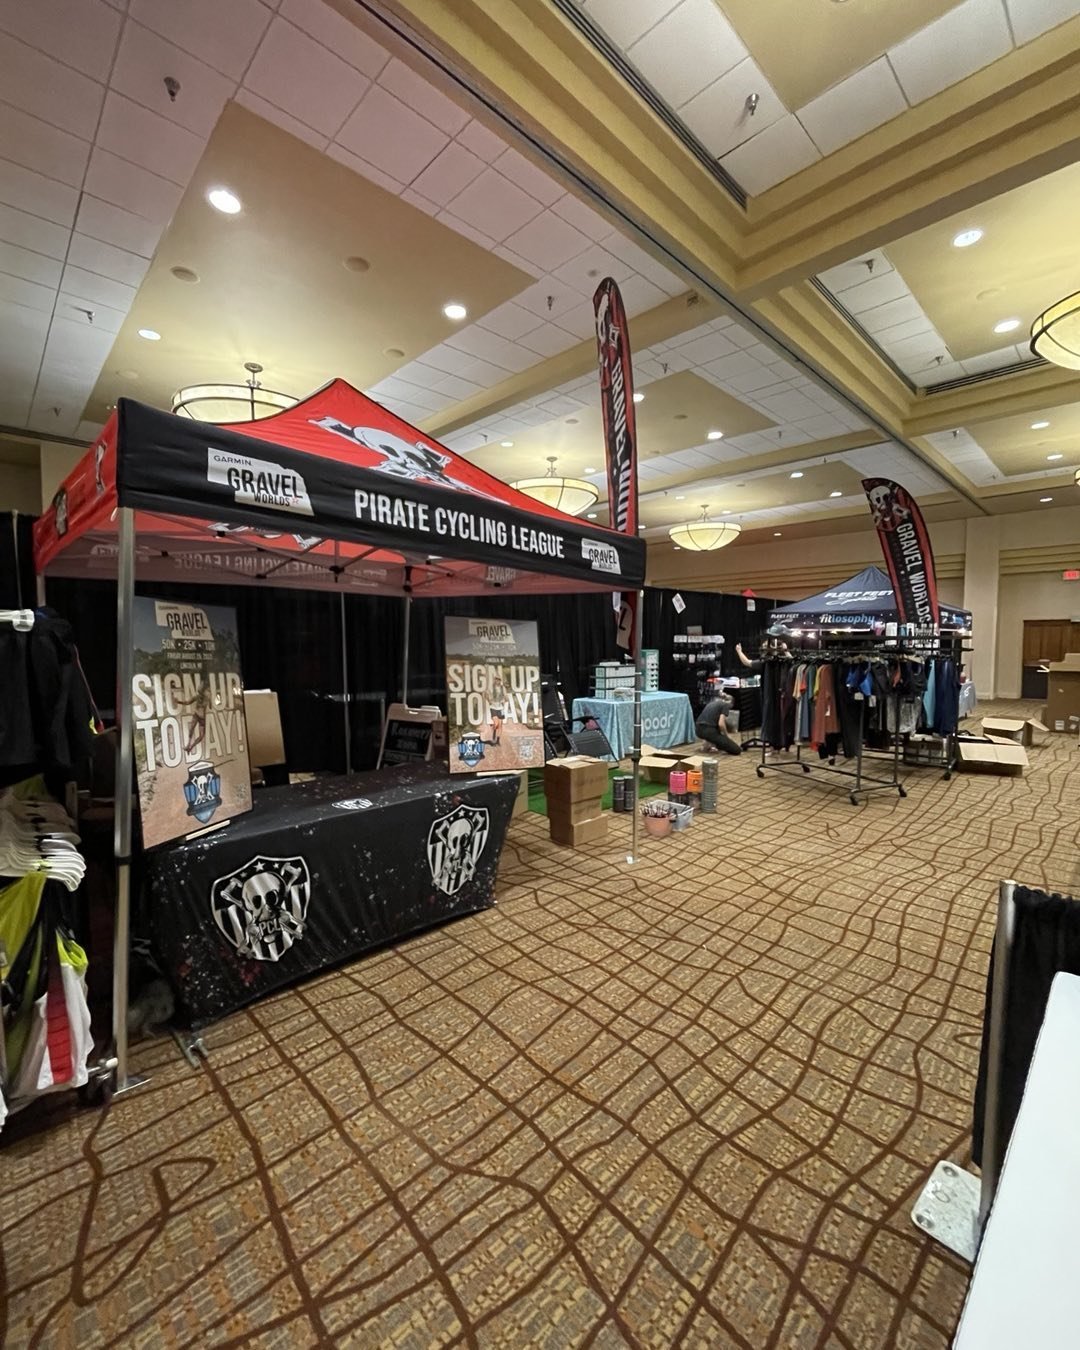 Be sure to stop by the Gravel Worlds booth this weekend at the Lincoln Marathon expo! We&rsquo;ll be giving away tshirts and special gift for anyone who signs up at the booth!!